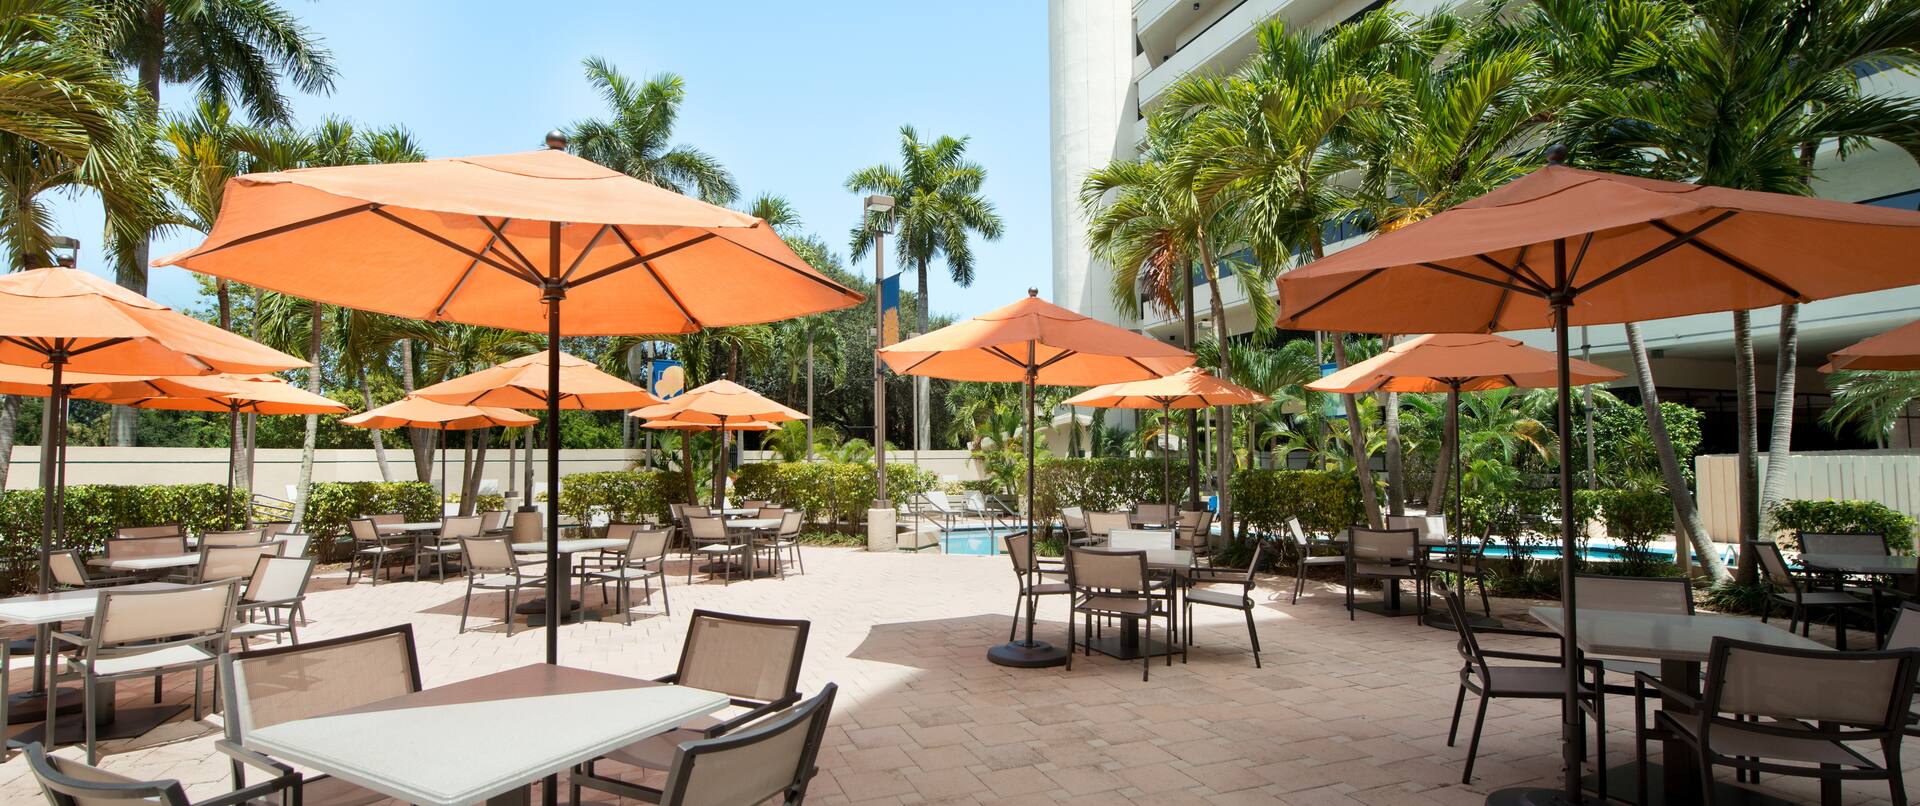 Daytime View of Tables With Orange Umbrellas and Chairs, Outdoor Pool, and Hotel Exterior Surrounded by Palm Trees